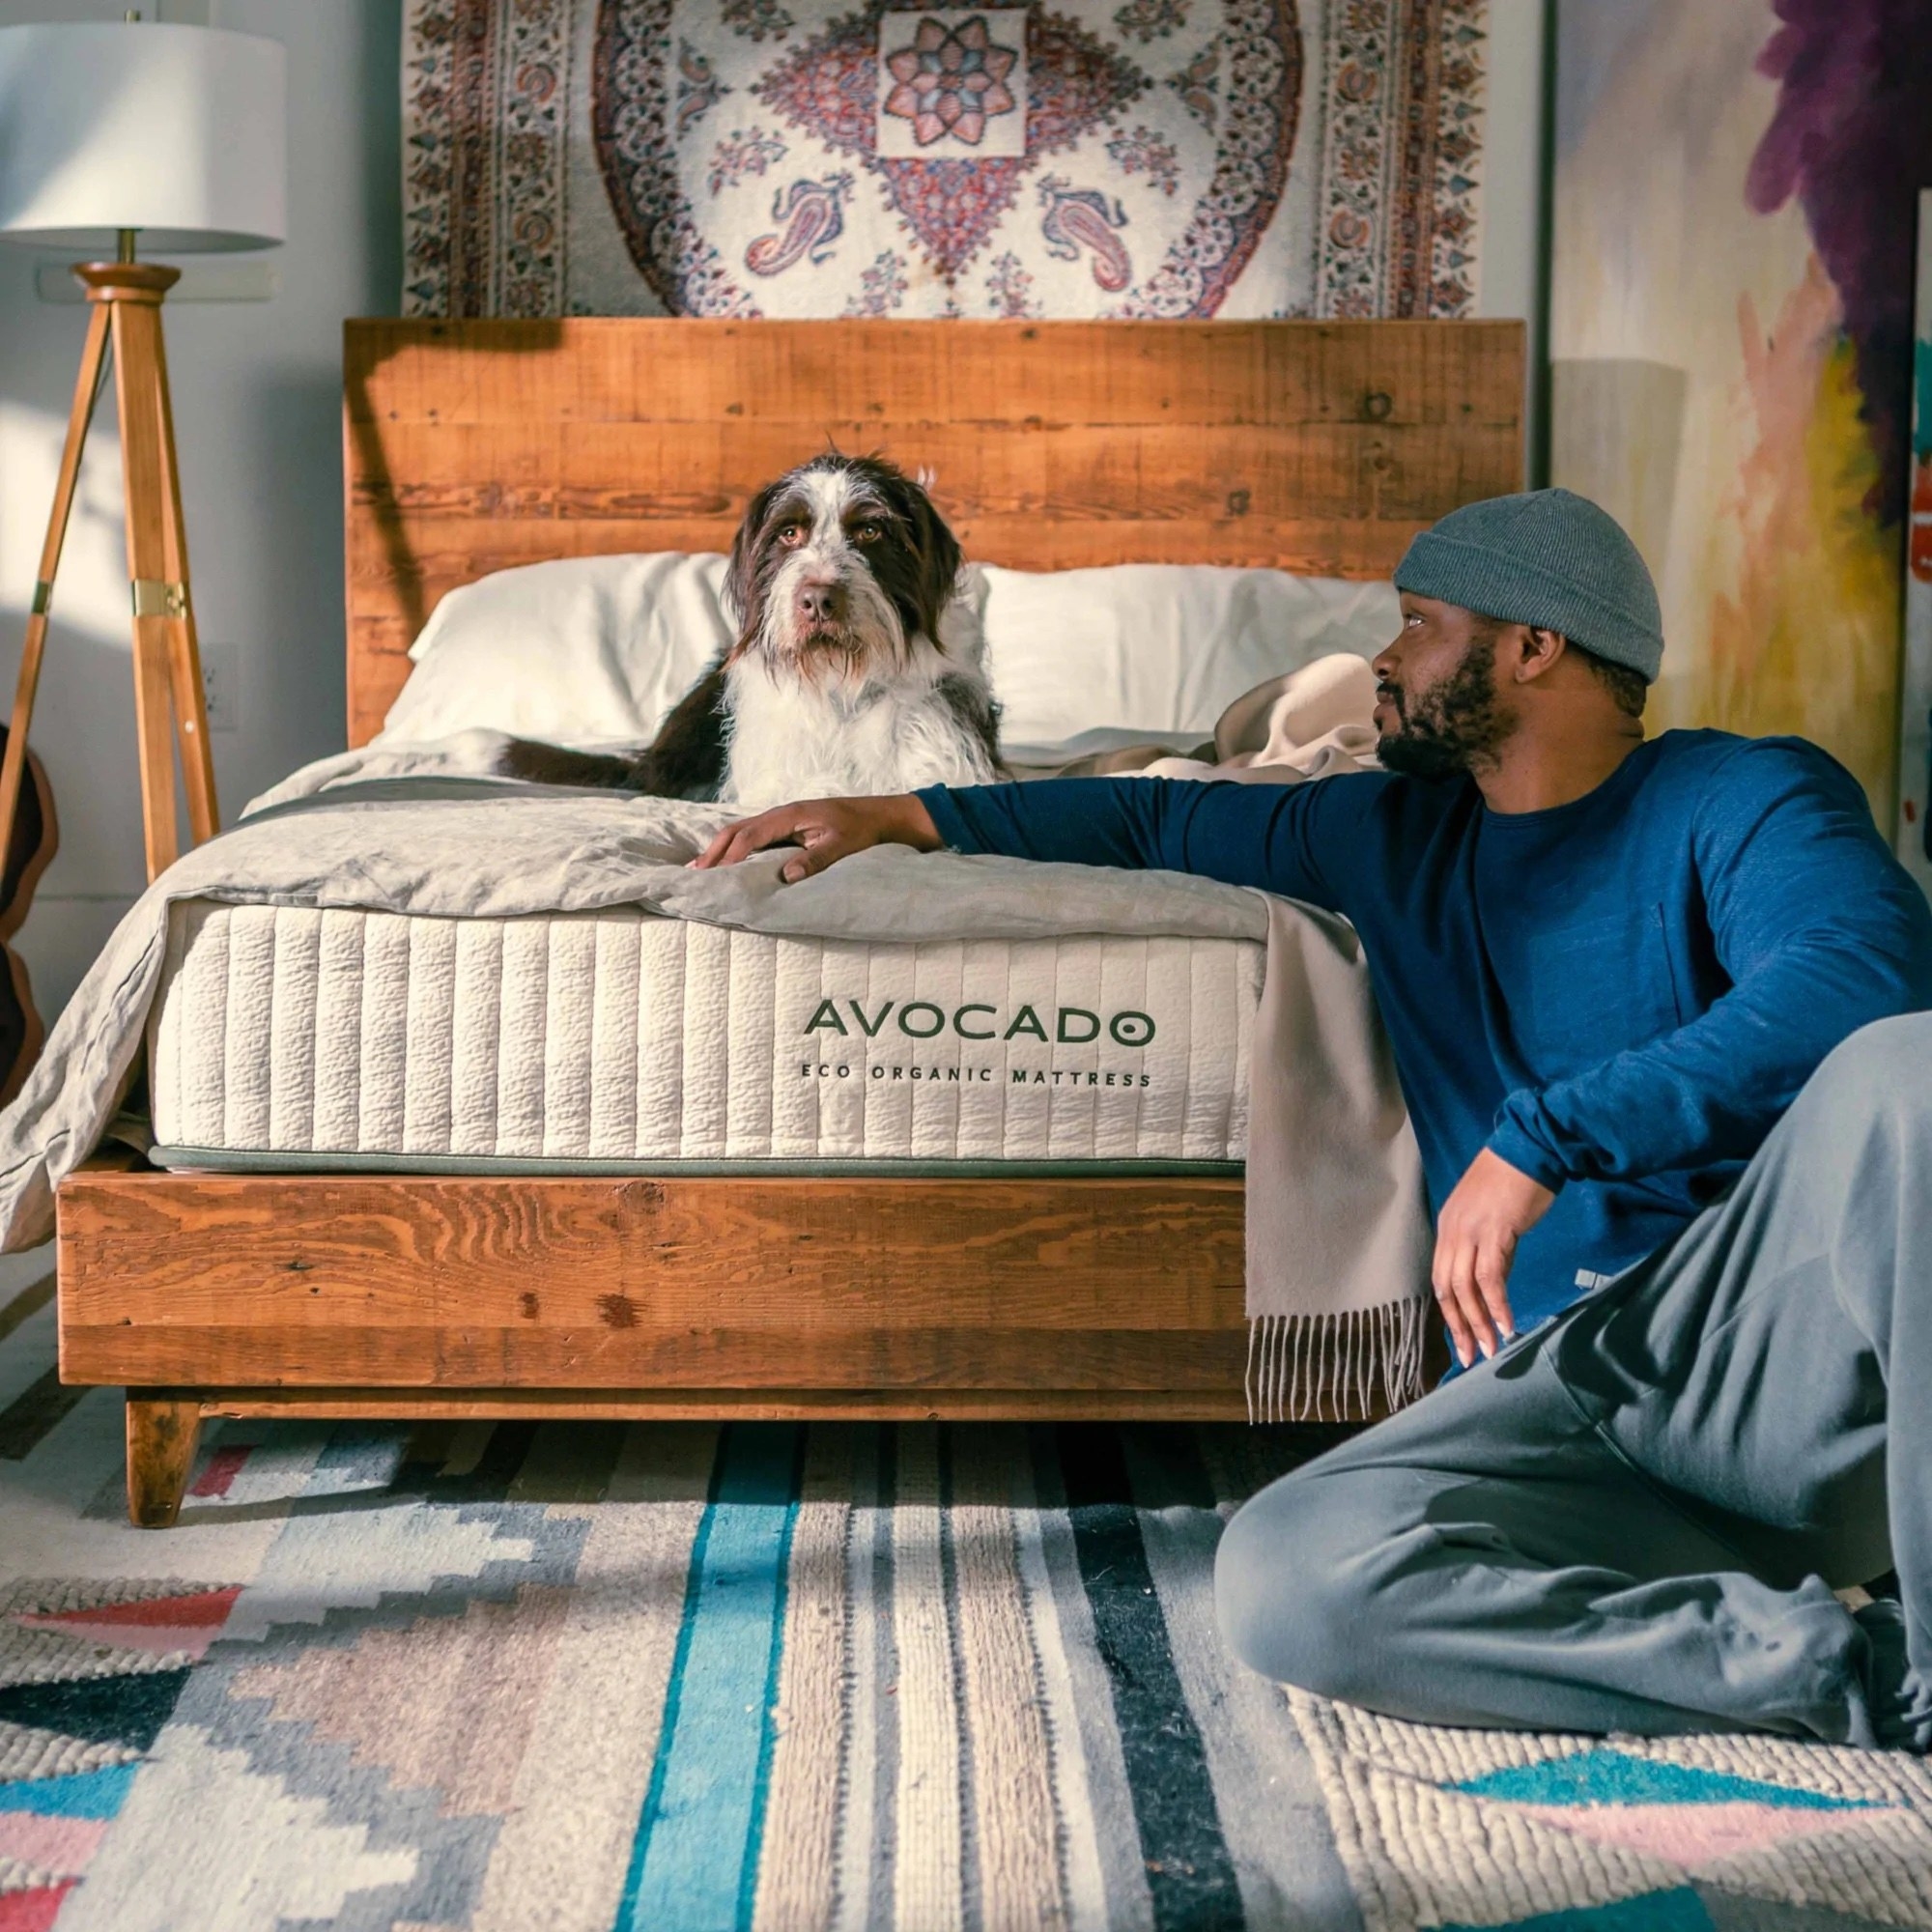 A dog sits on the Avocado mattress while a person looks on